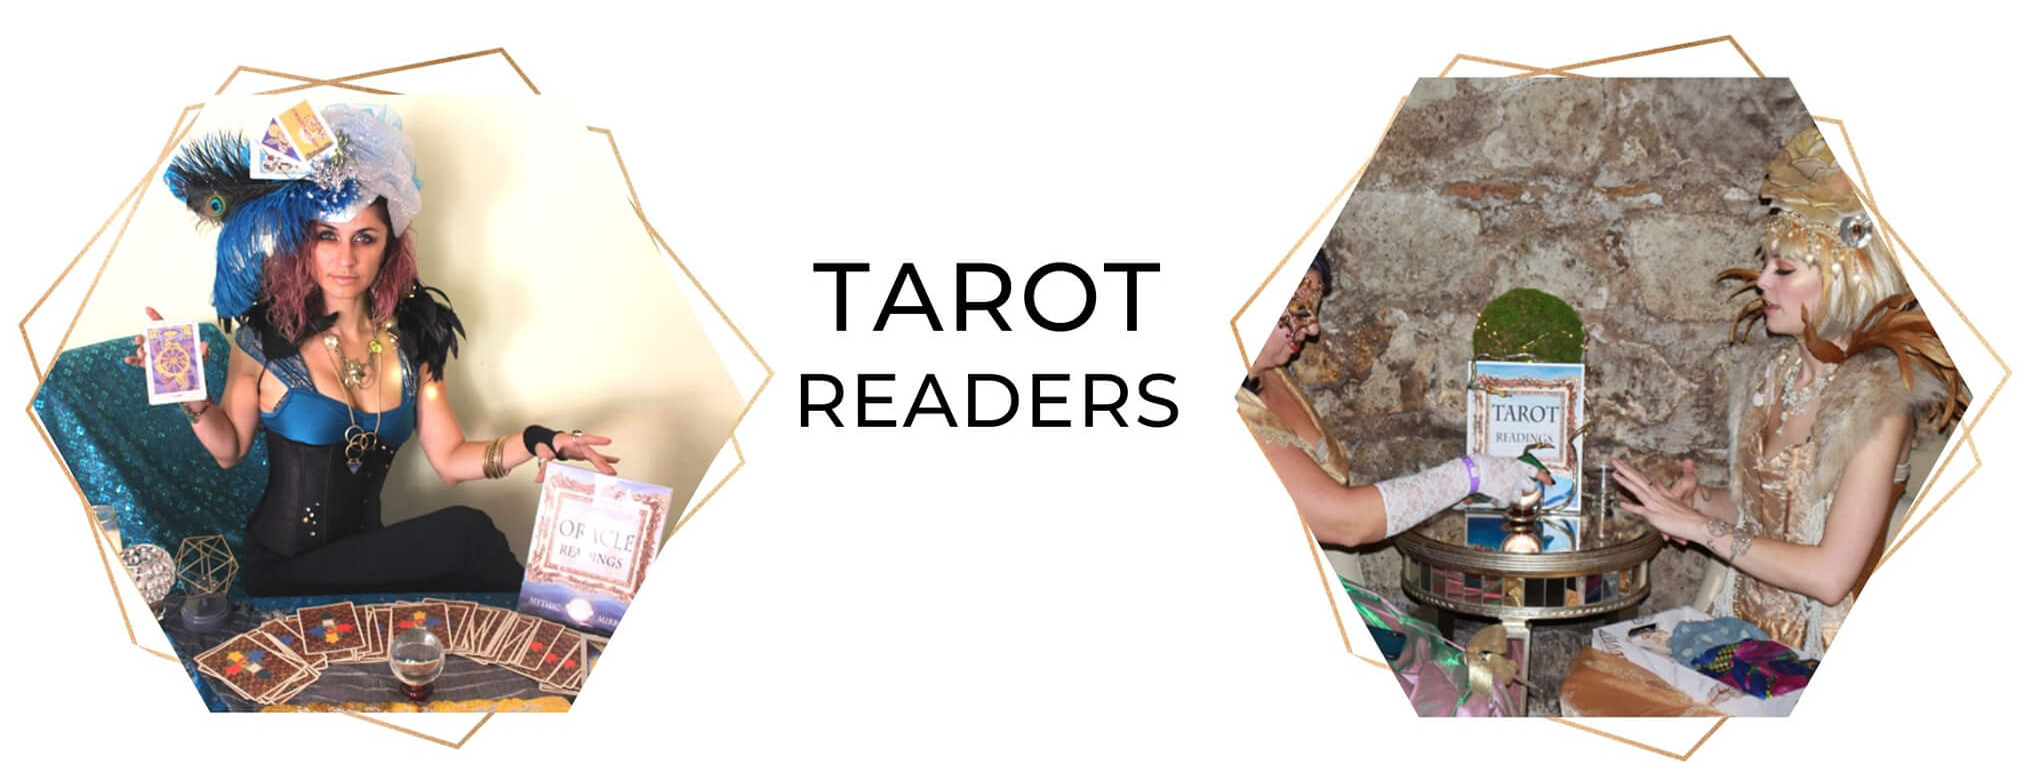 Tarot Readers booking for events in California by Catalyst Arts